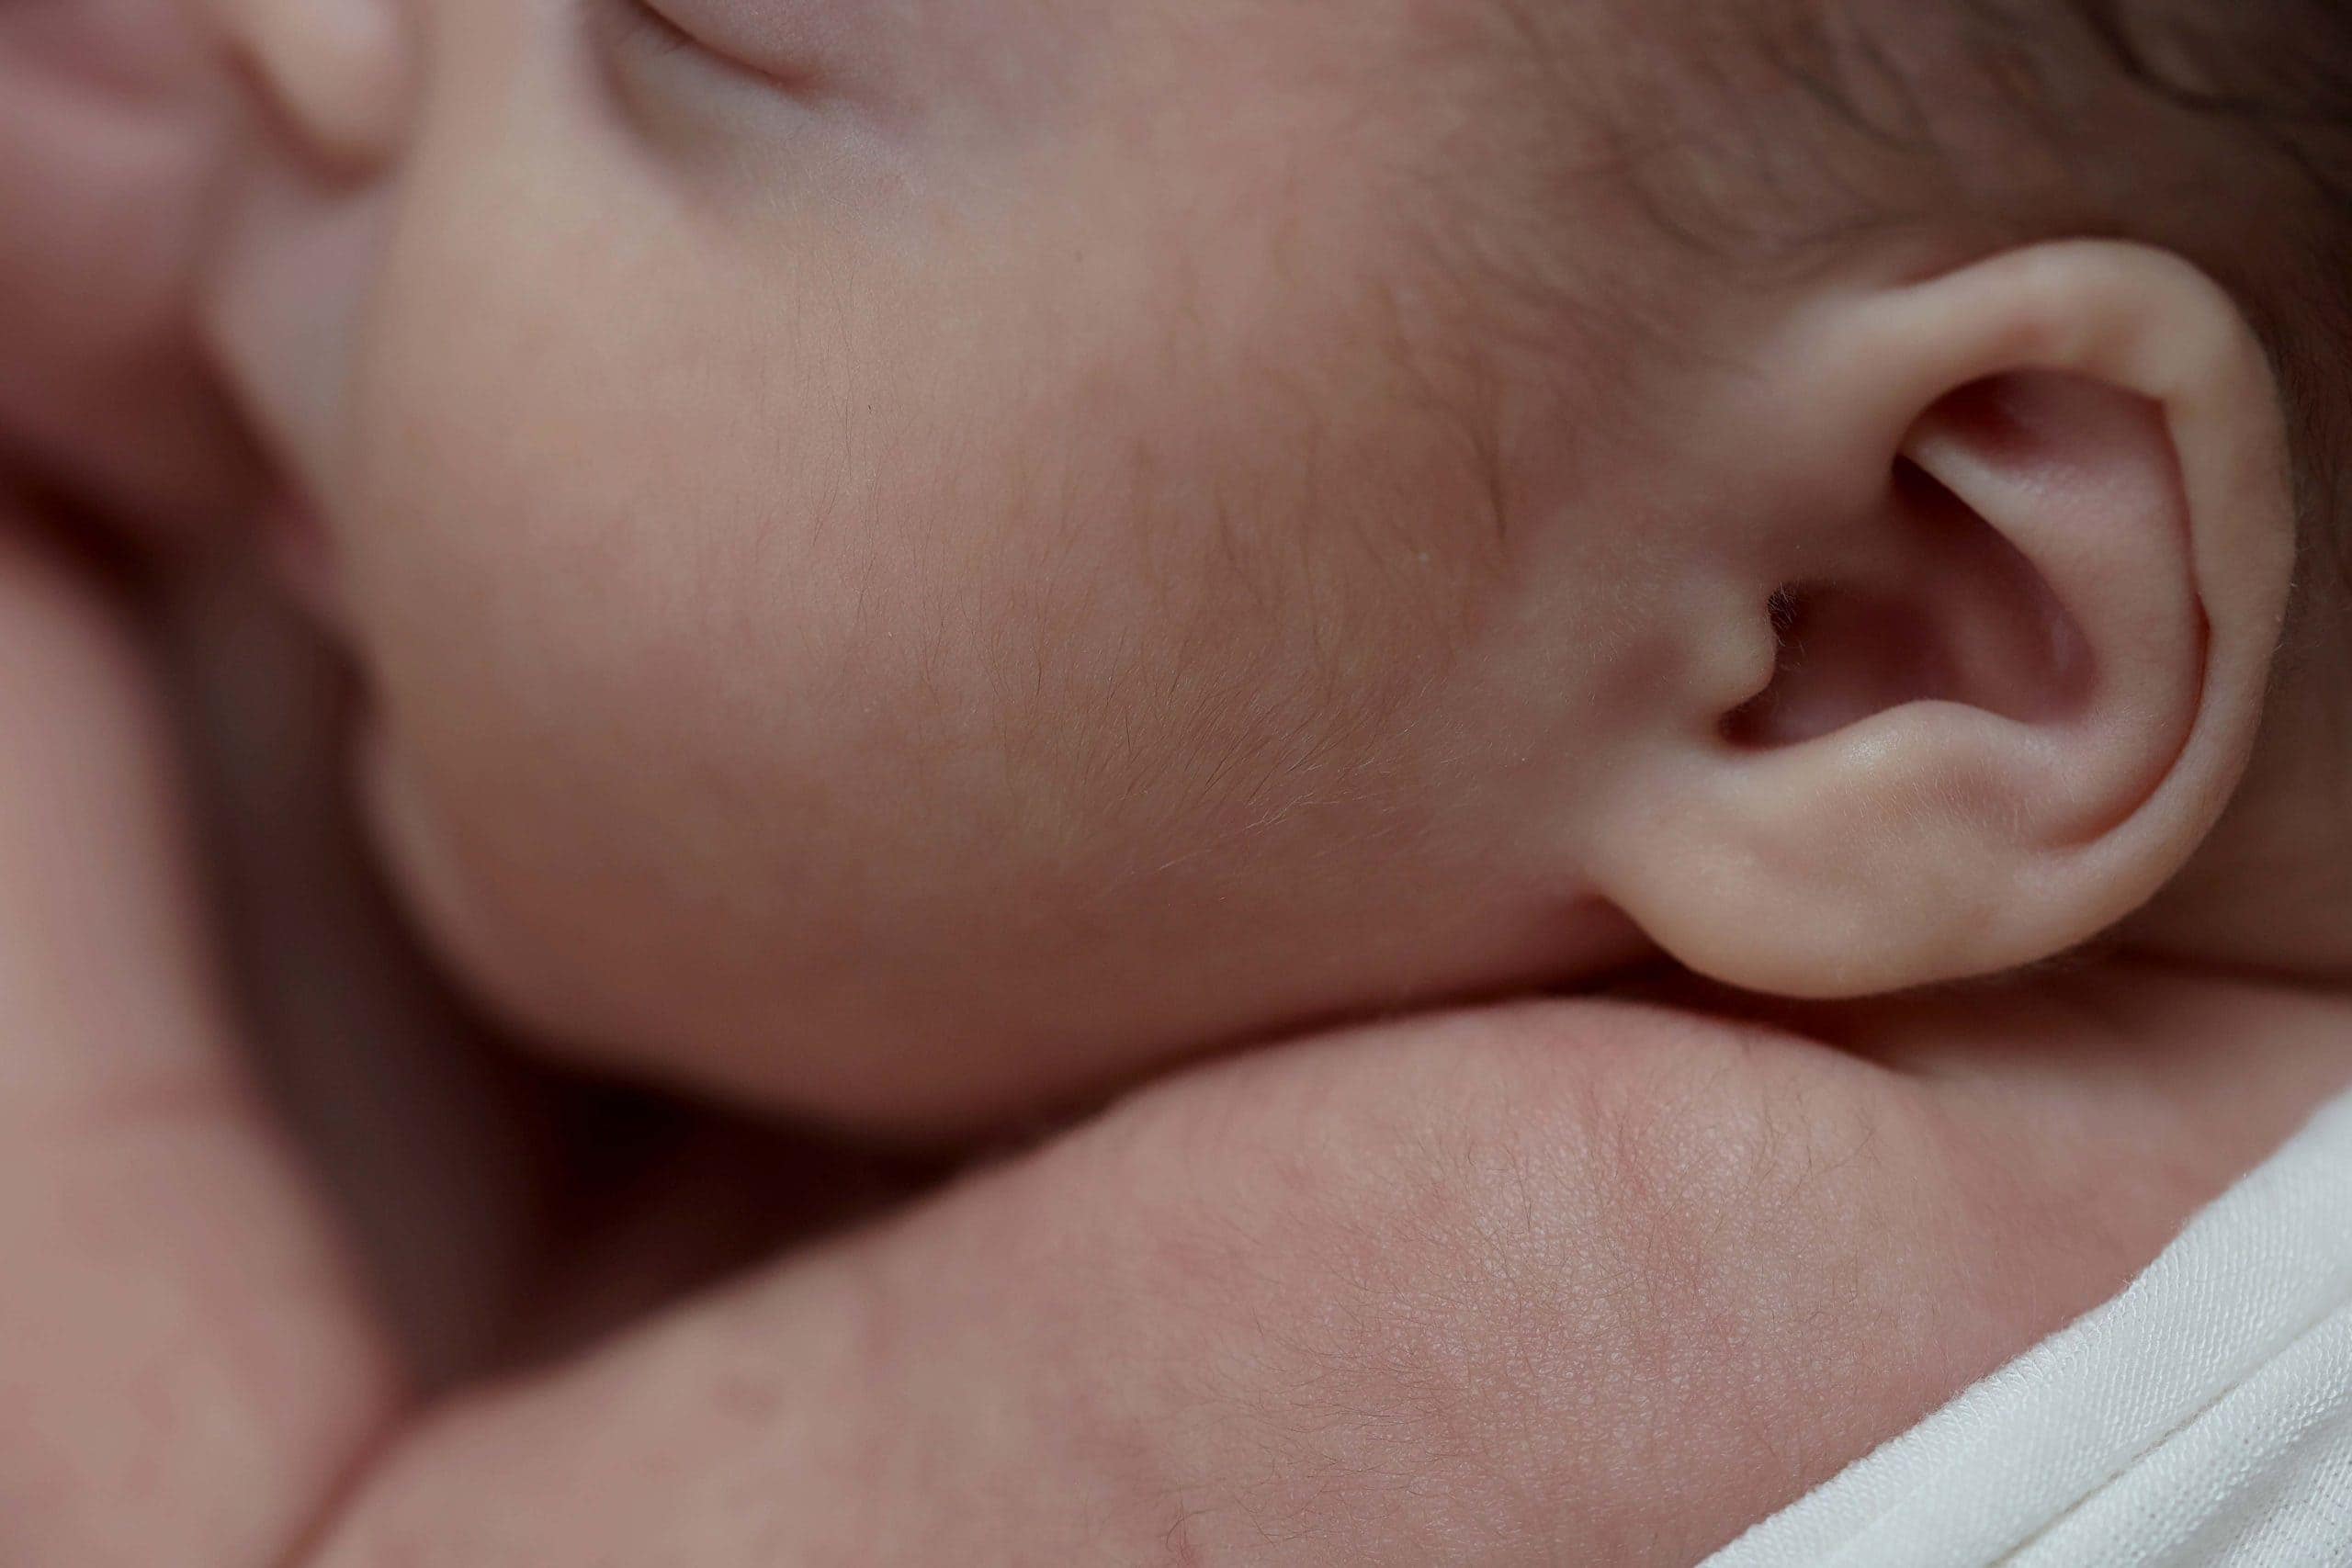 up close image of details of a newborn's skin and facial features taken from the side perspective, showing their eyelashes, nose, and ears